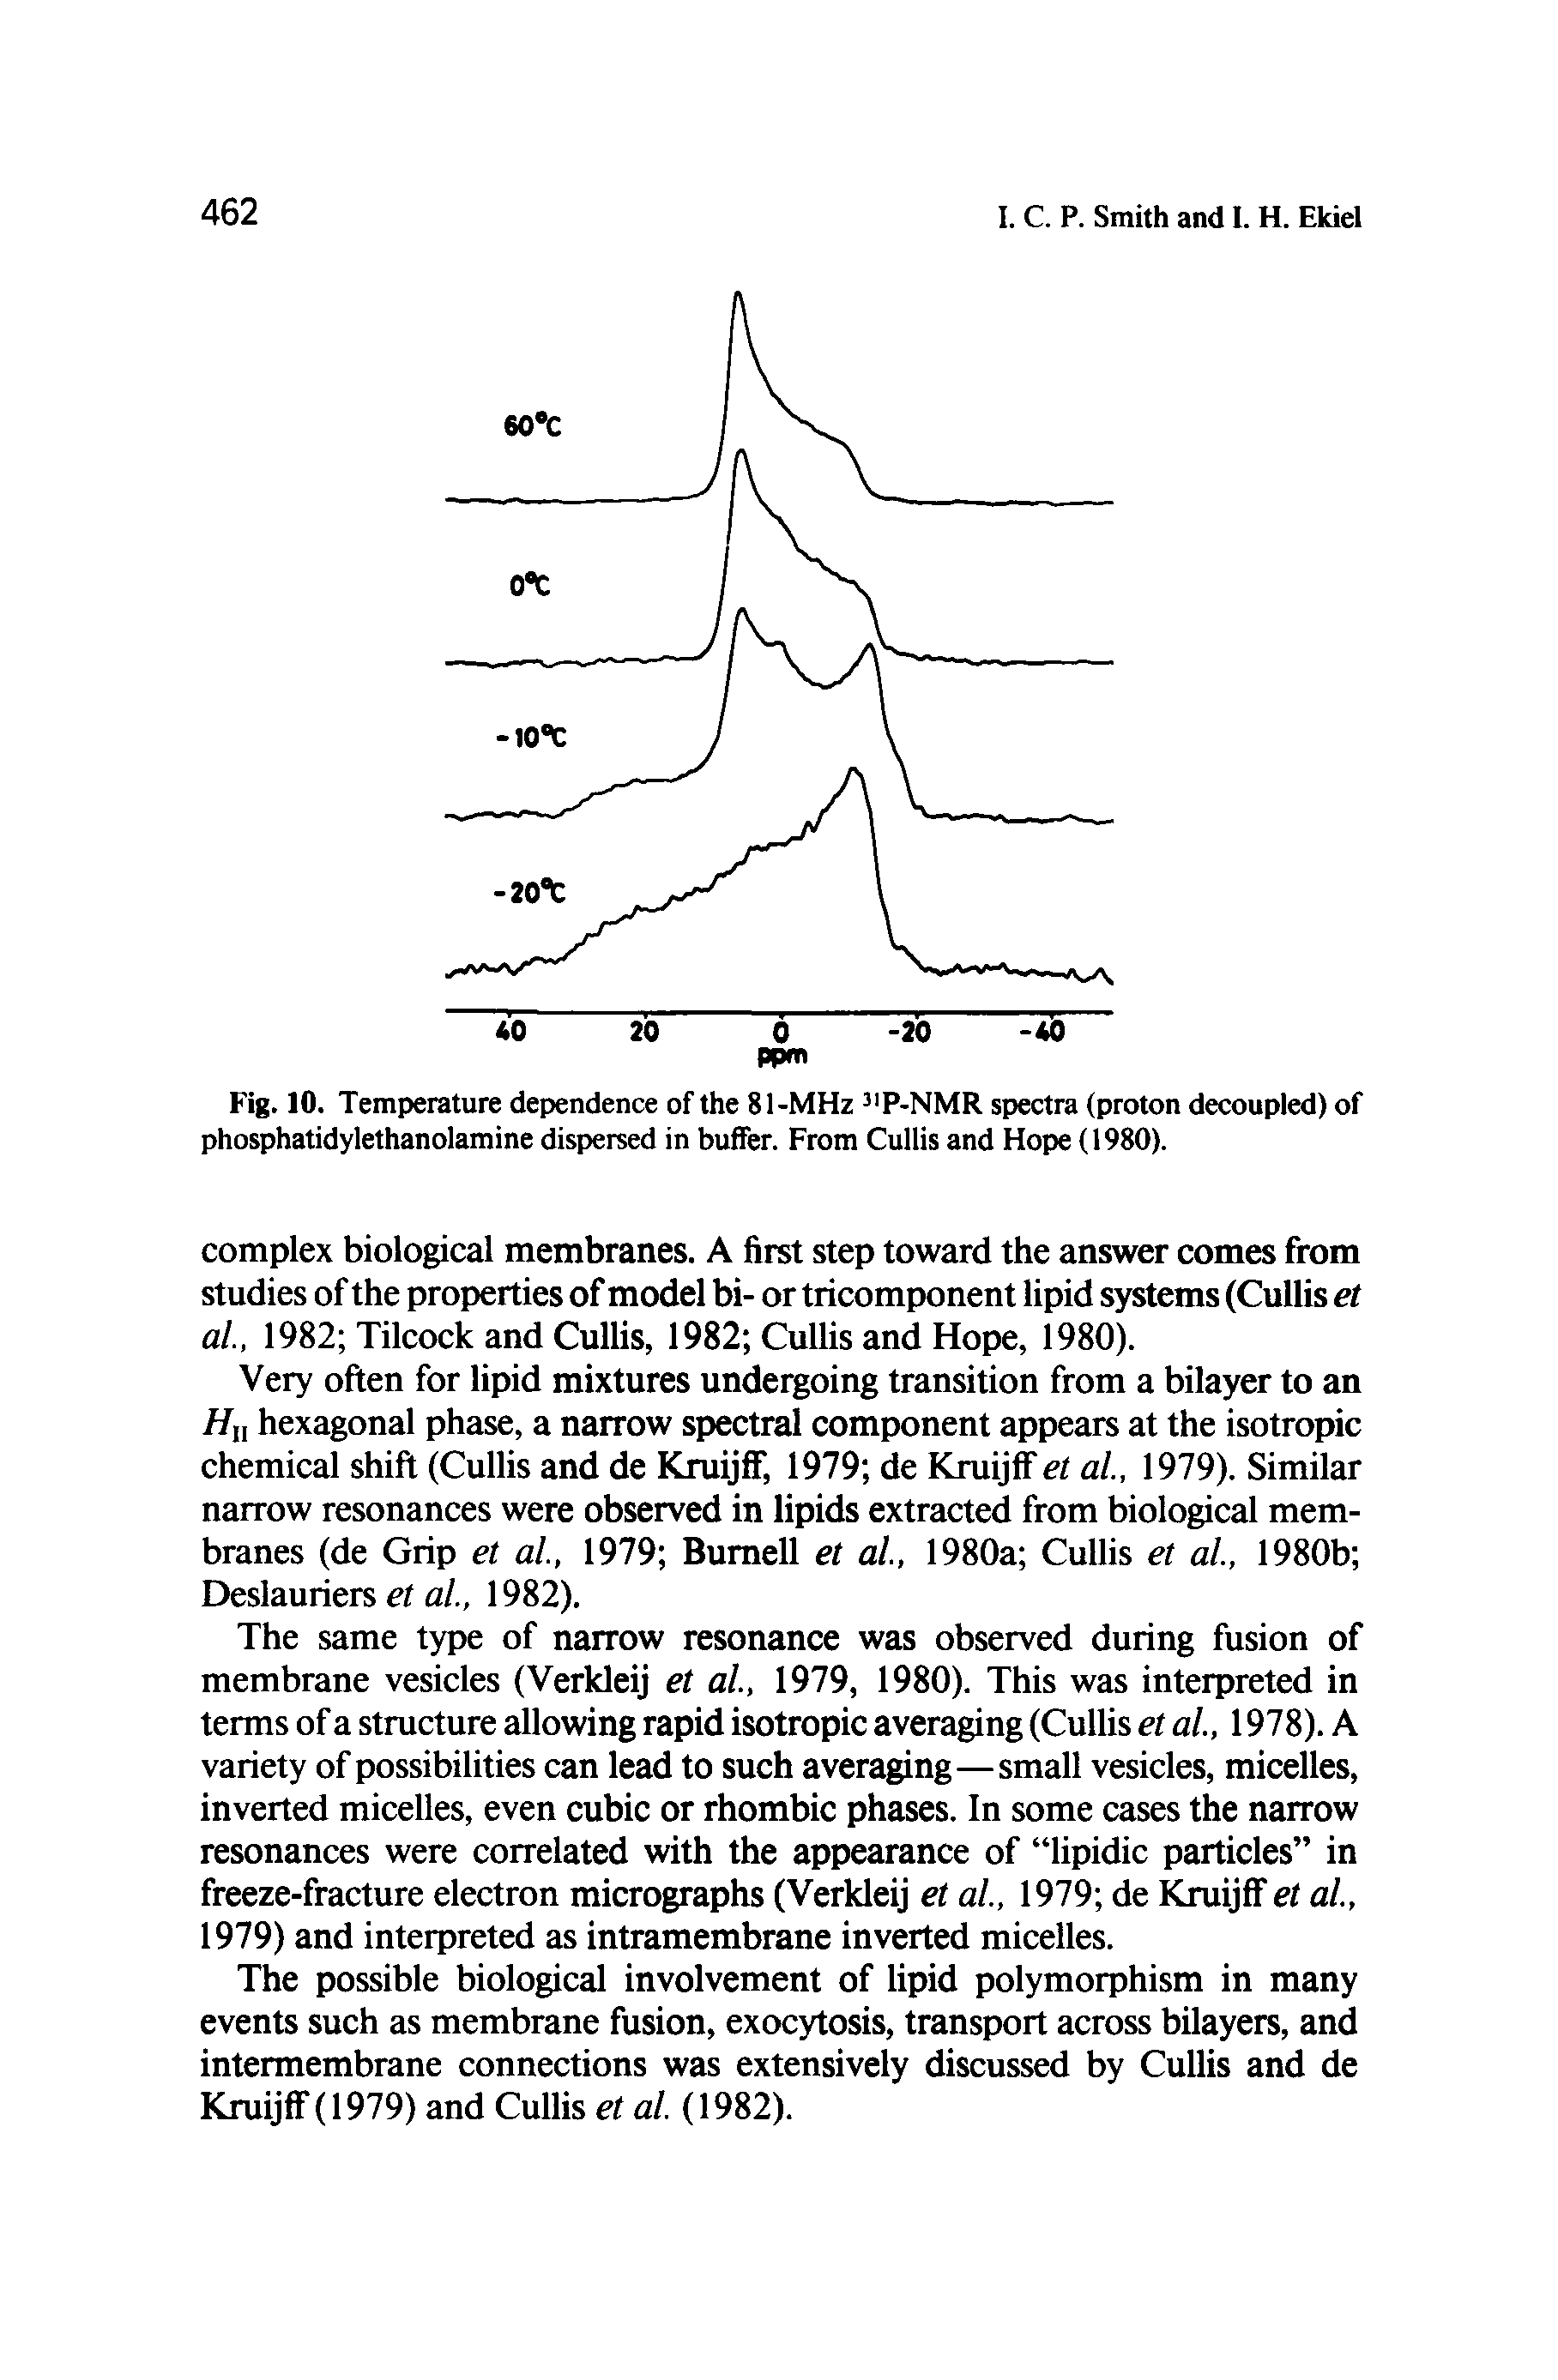 Fig. 10. Temperature dependence of the 81-MHz P-NMR spectra (proton decoupled) of phosphatidylethanolamine dispersed in buffer. From Cullis and Hope (1980).